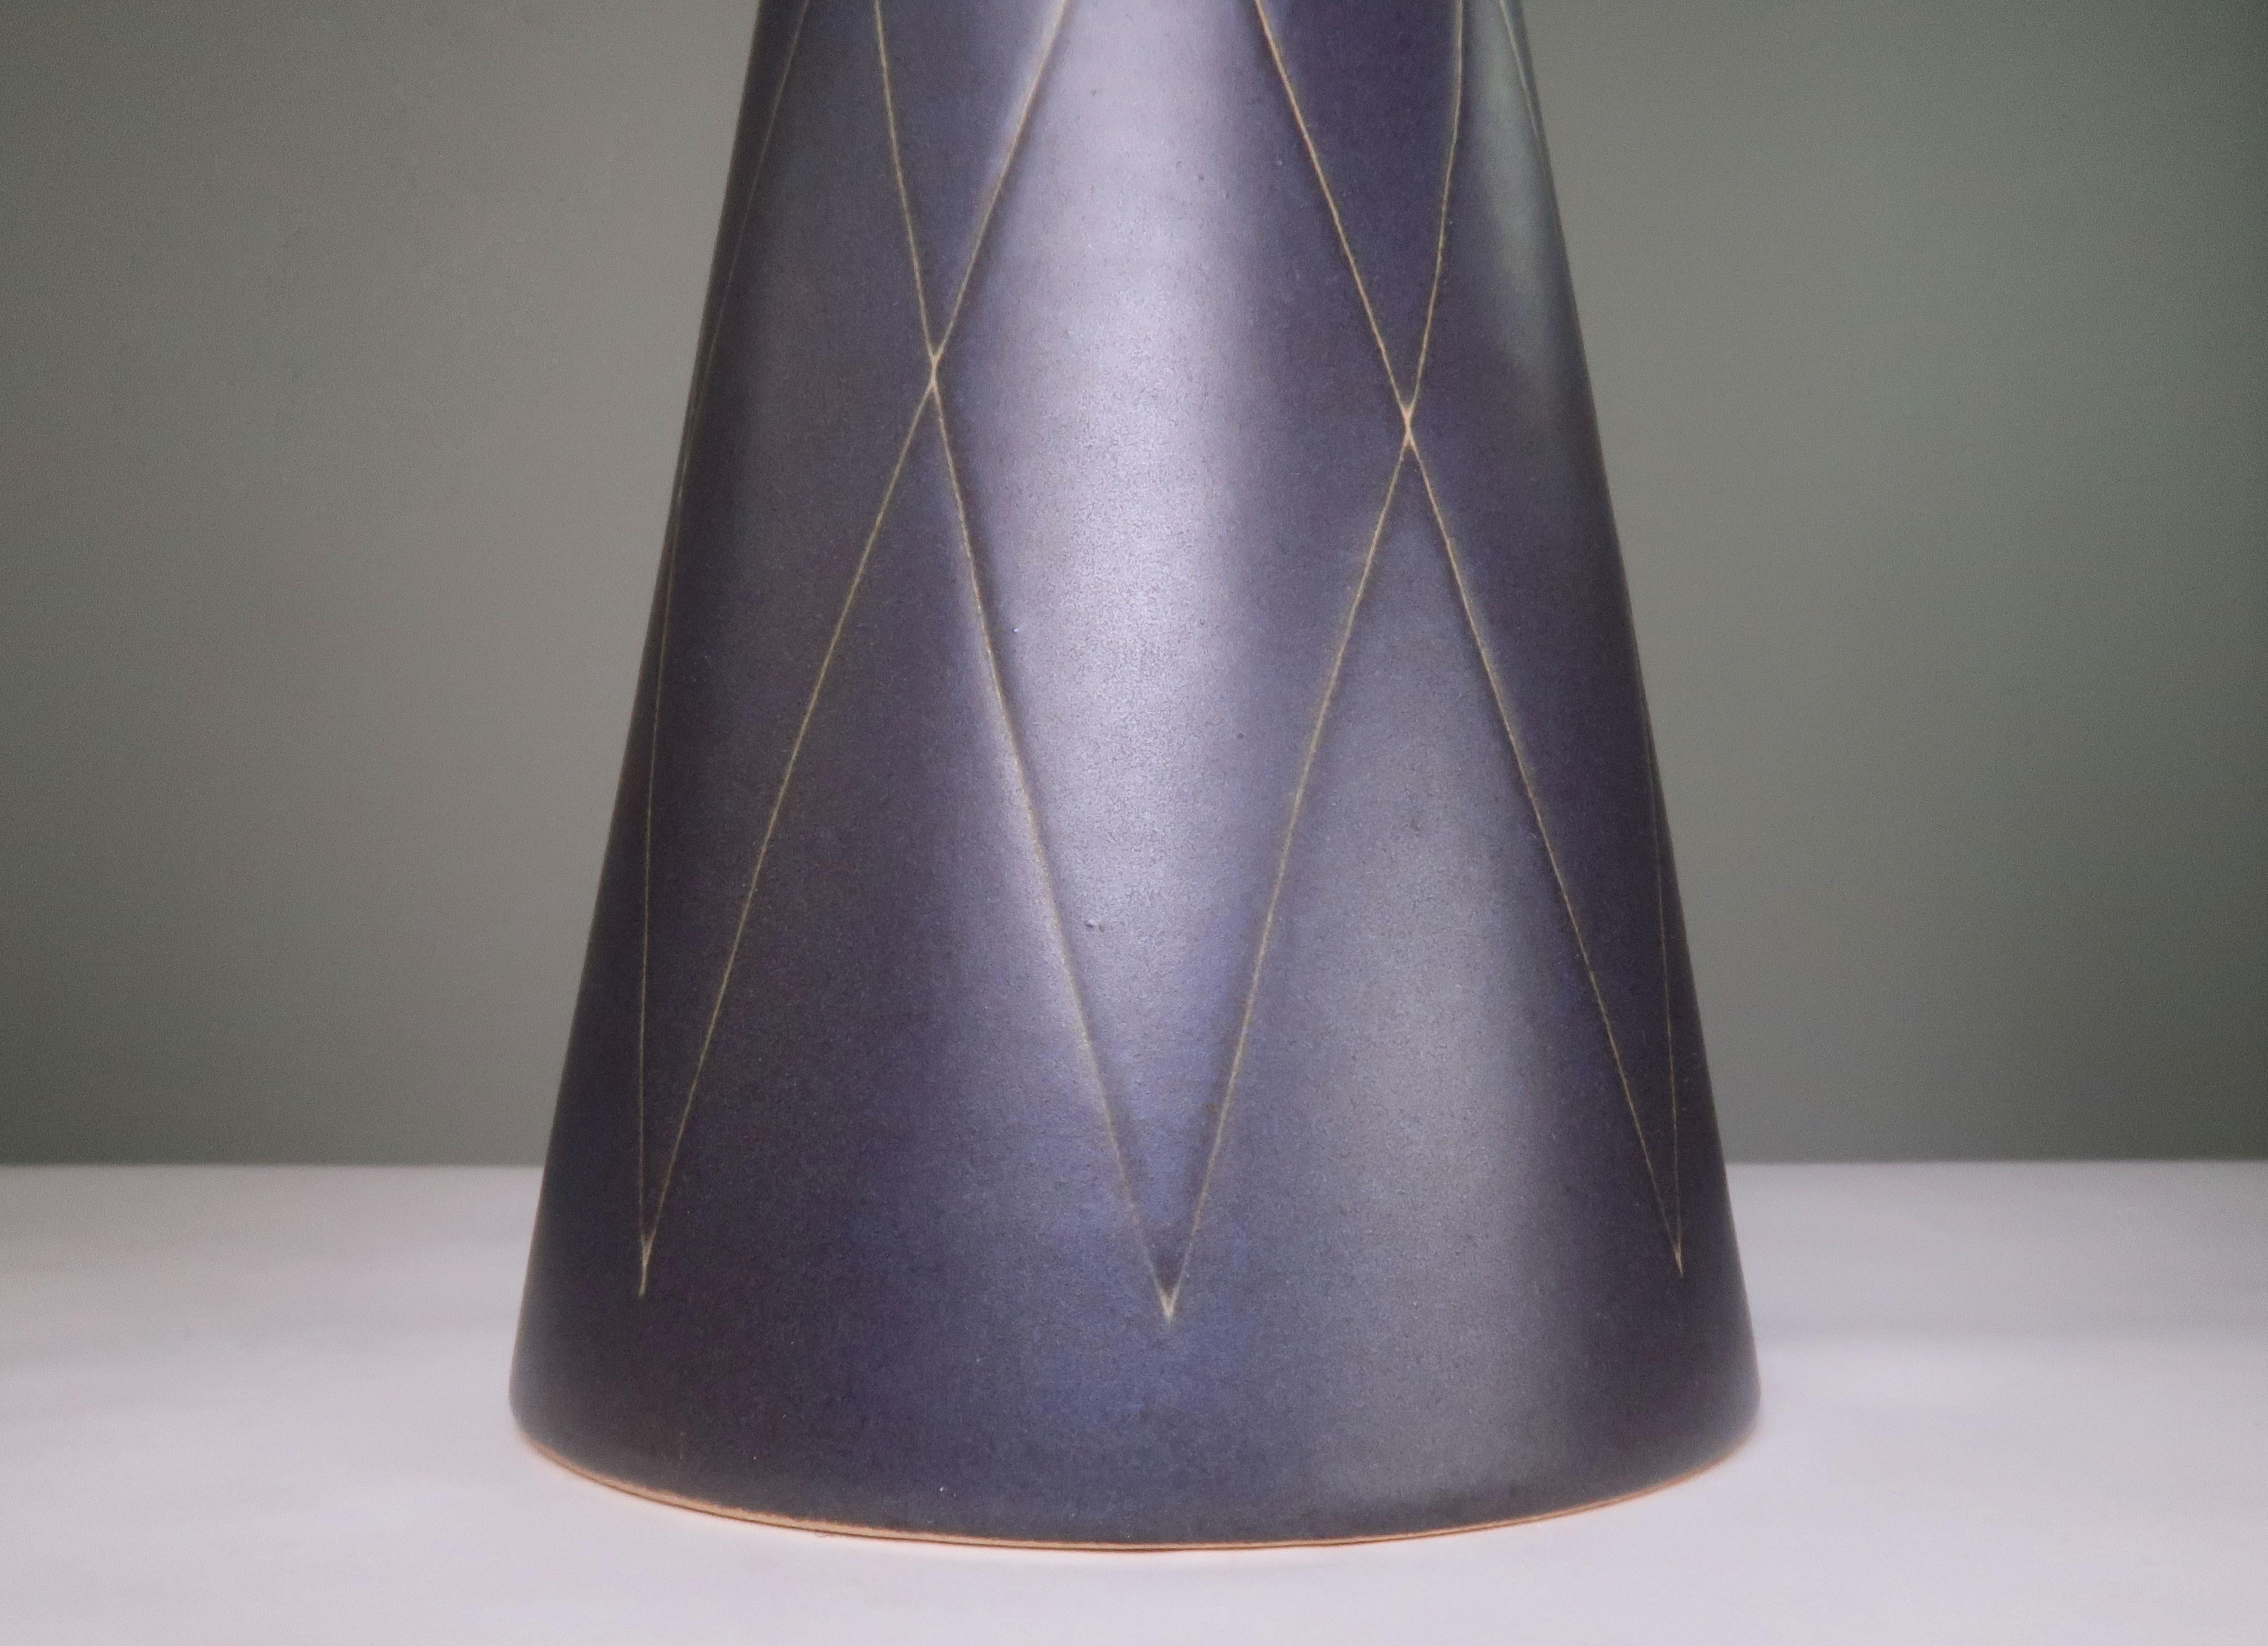 Hand-Crafted Art Deco Graphite Ceramic Lamp by Michael Andersen, 1950s For Sale